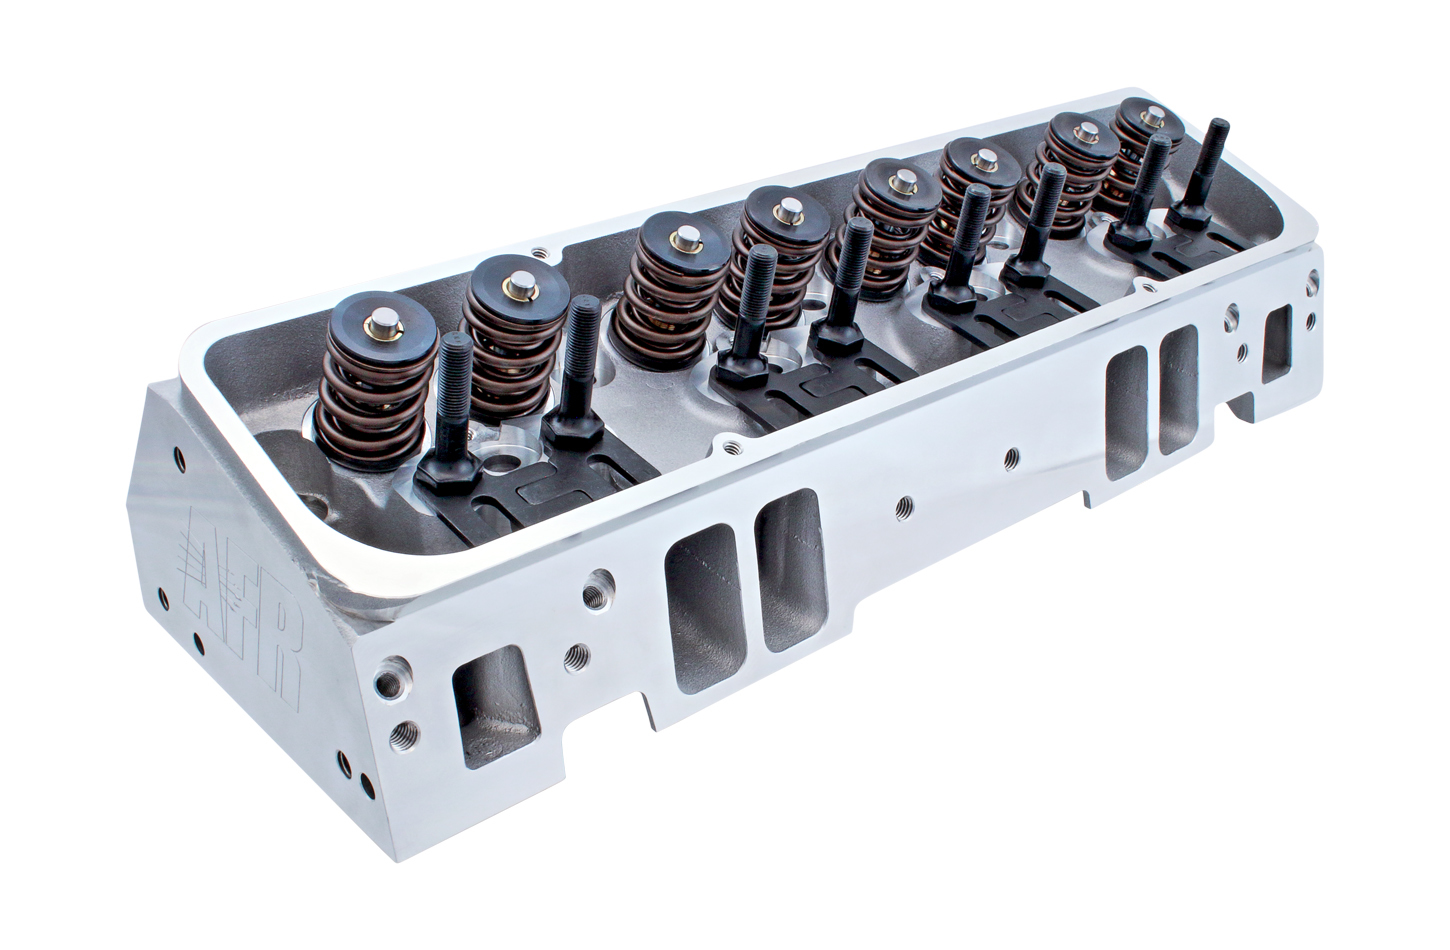 Air Flow Research 1001 Cylinder Head, Enforcer, Assembled, 2.020 / 1.600 in Valves, 195 cc Intake, 64 cc Chamber, 1.290 in Springs, Straight Plug, Aluminum, Small Block Chevy, Each